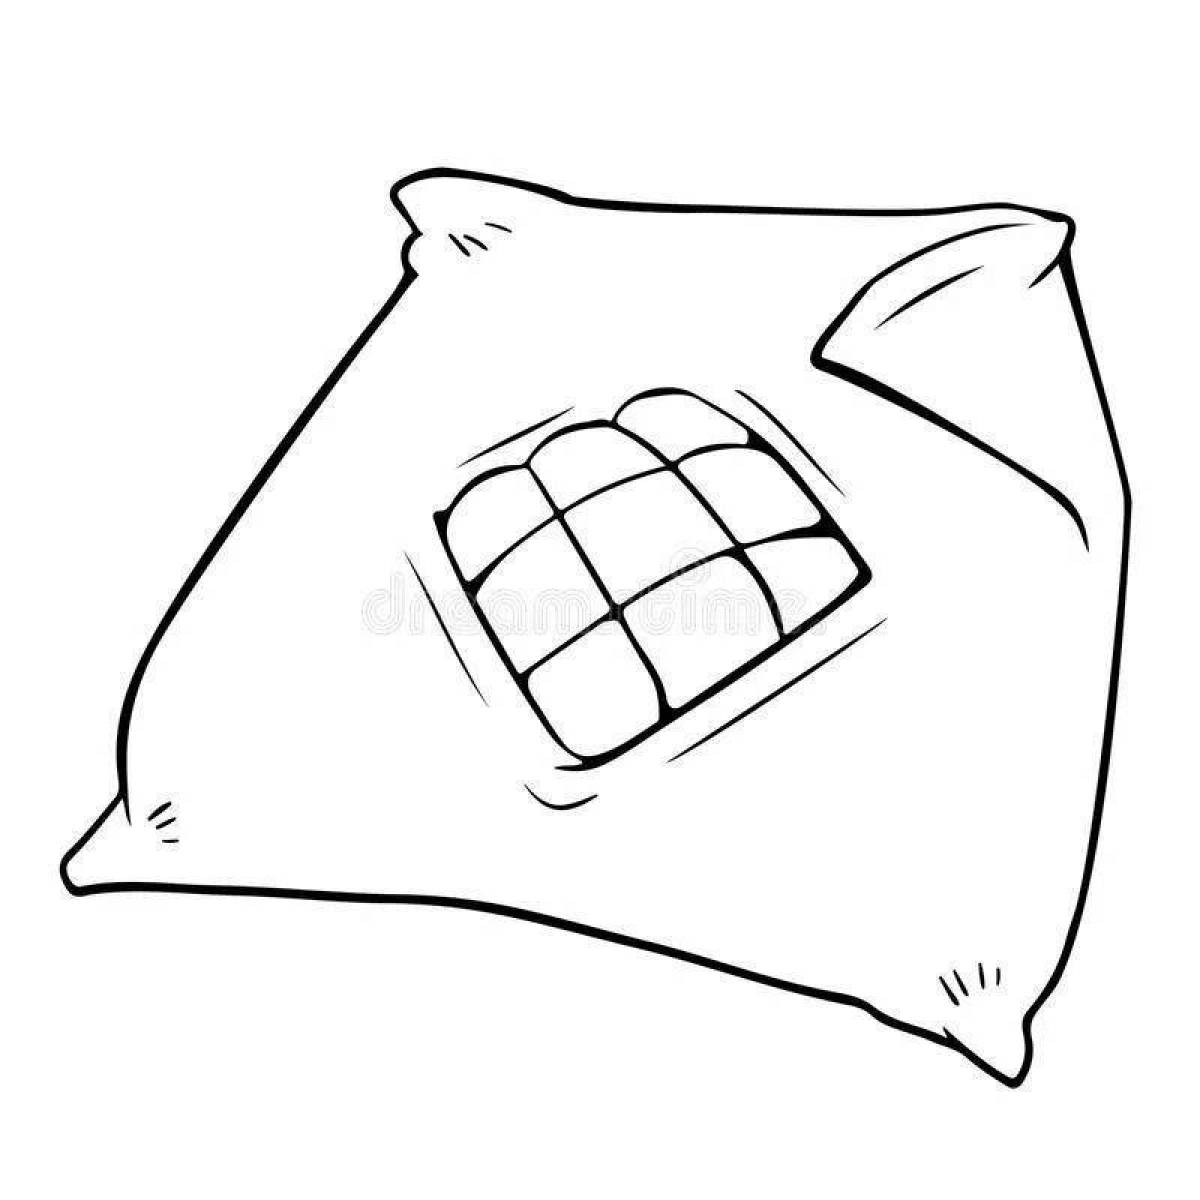 Adorable blanket coloring page